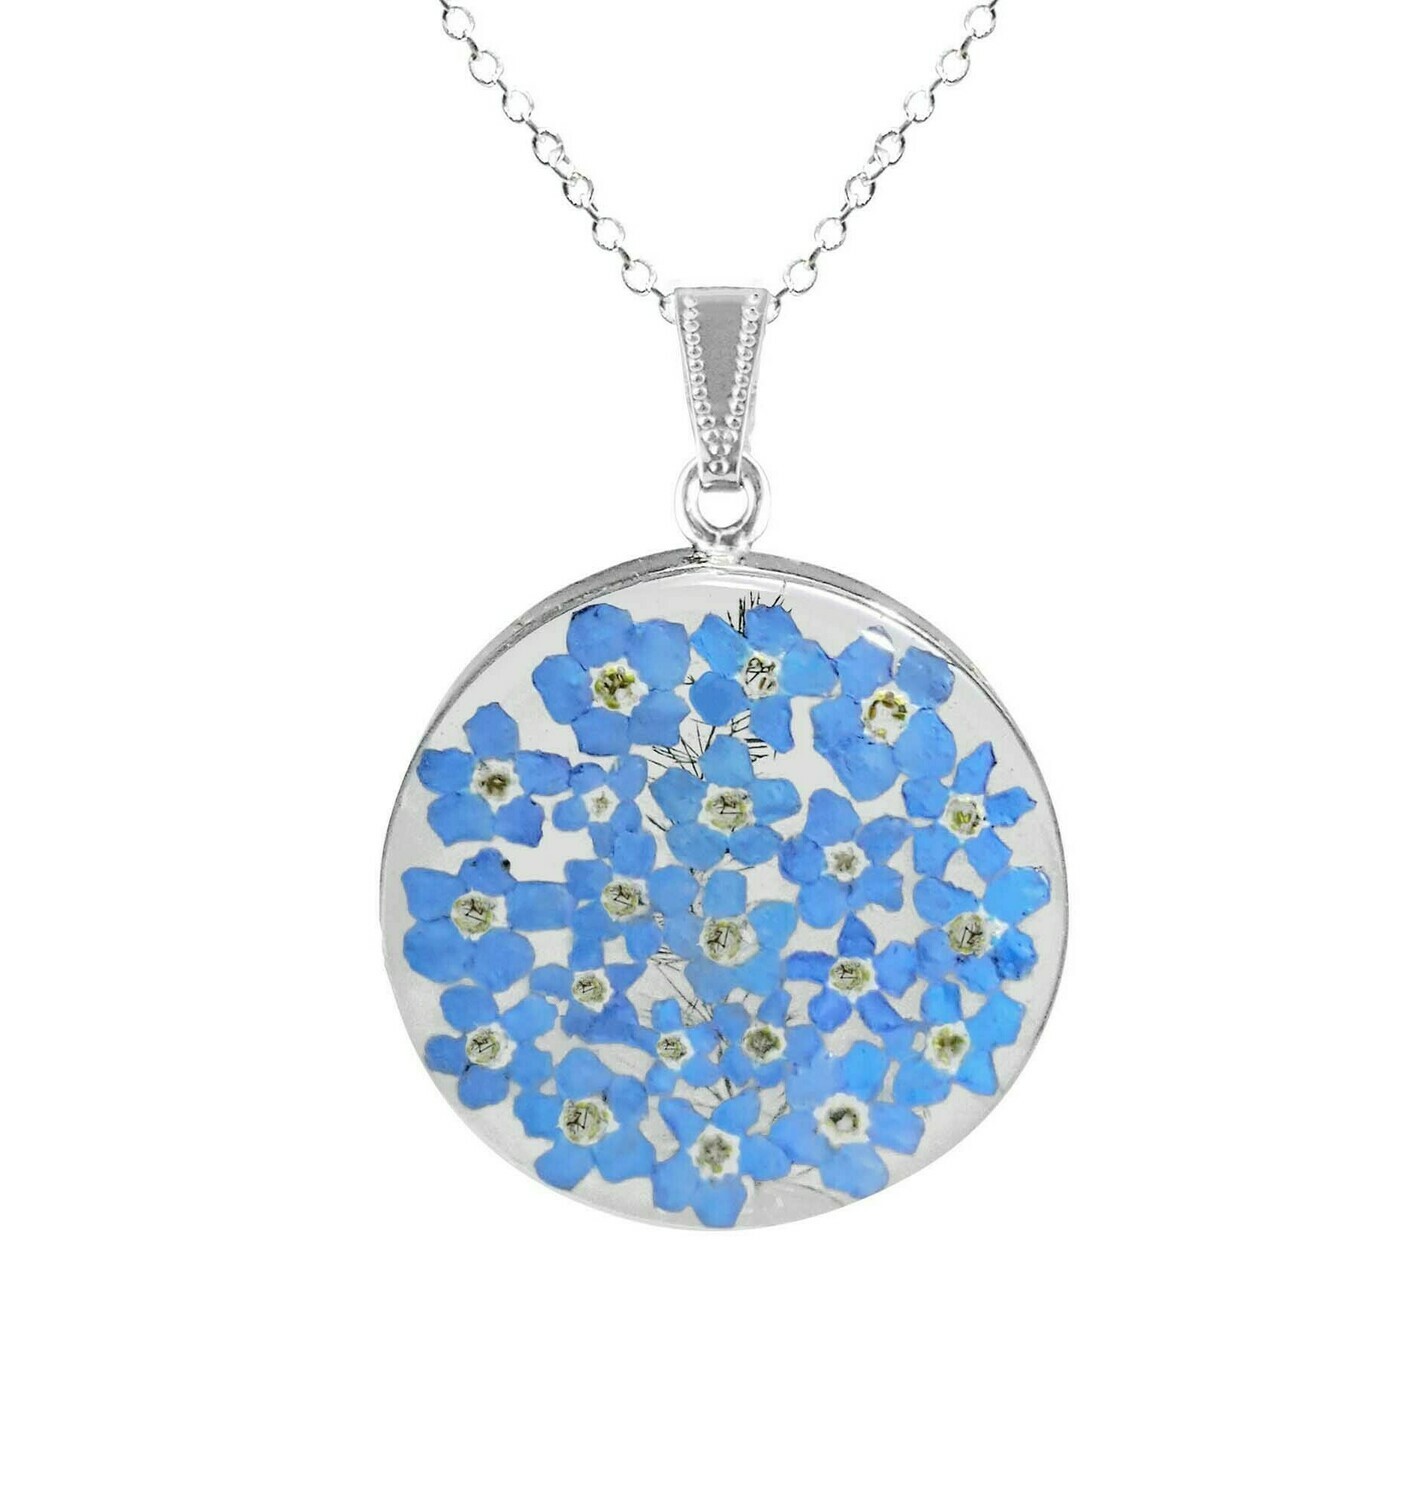 Forget-Me-Not Necklace, Large Circle, Transparent